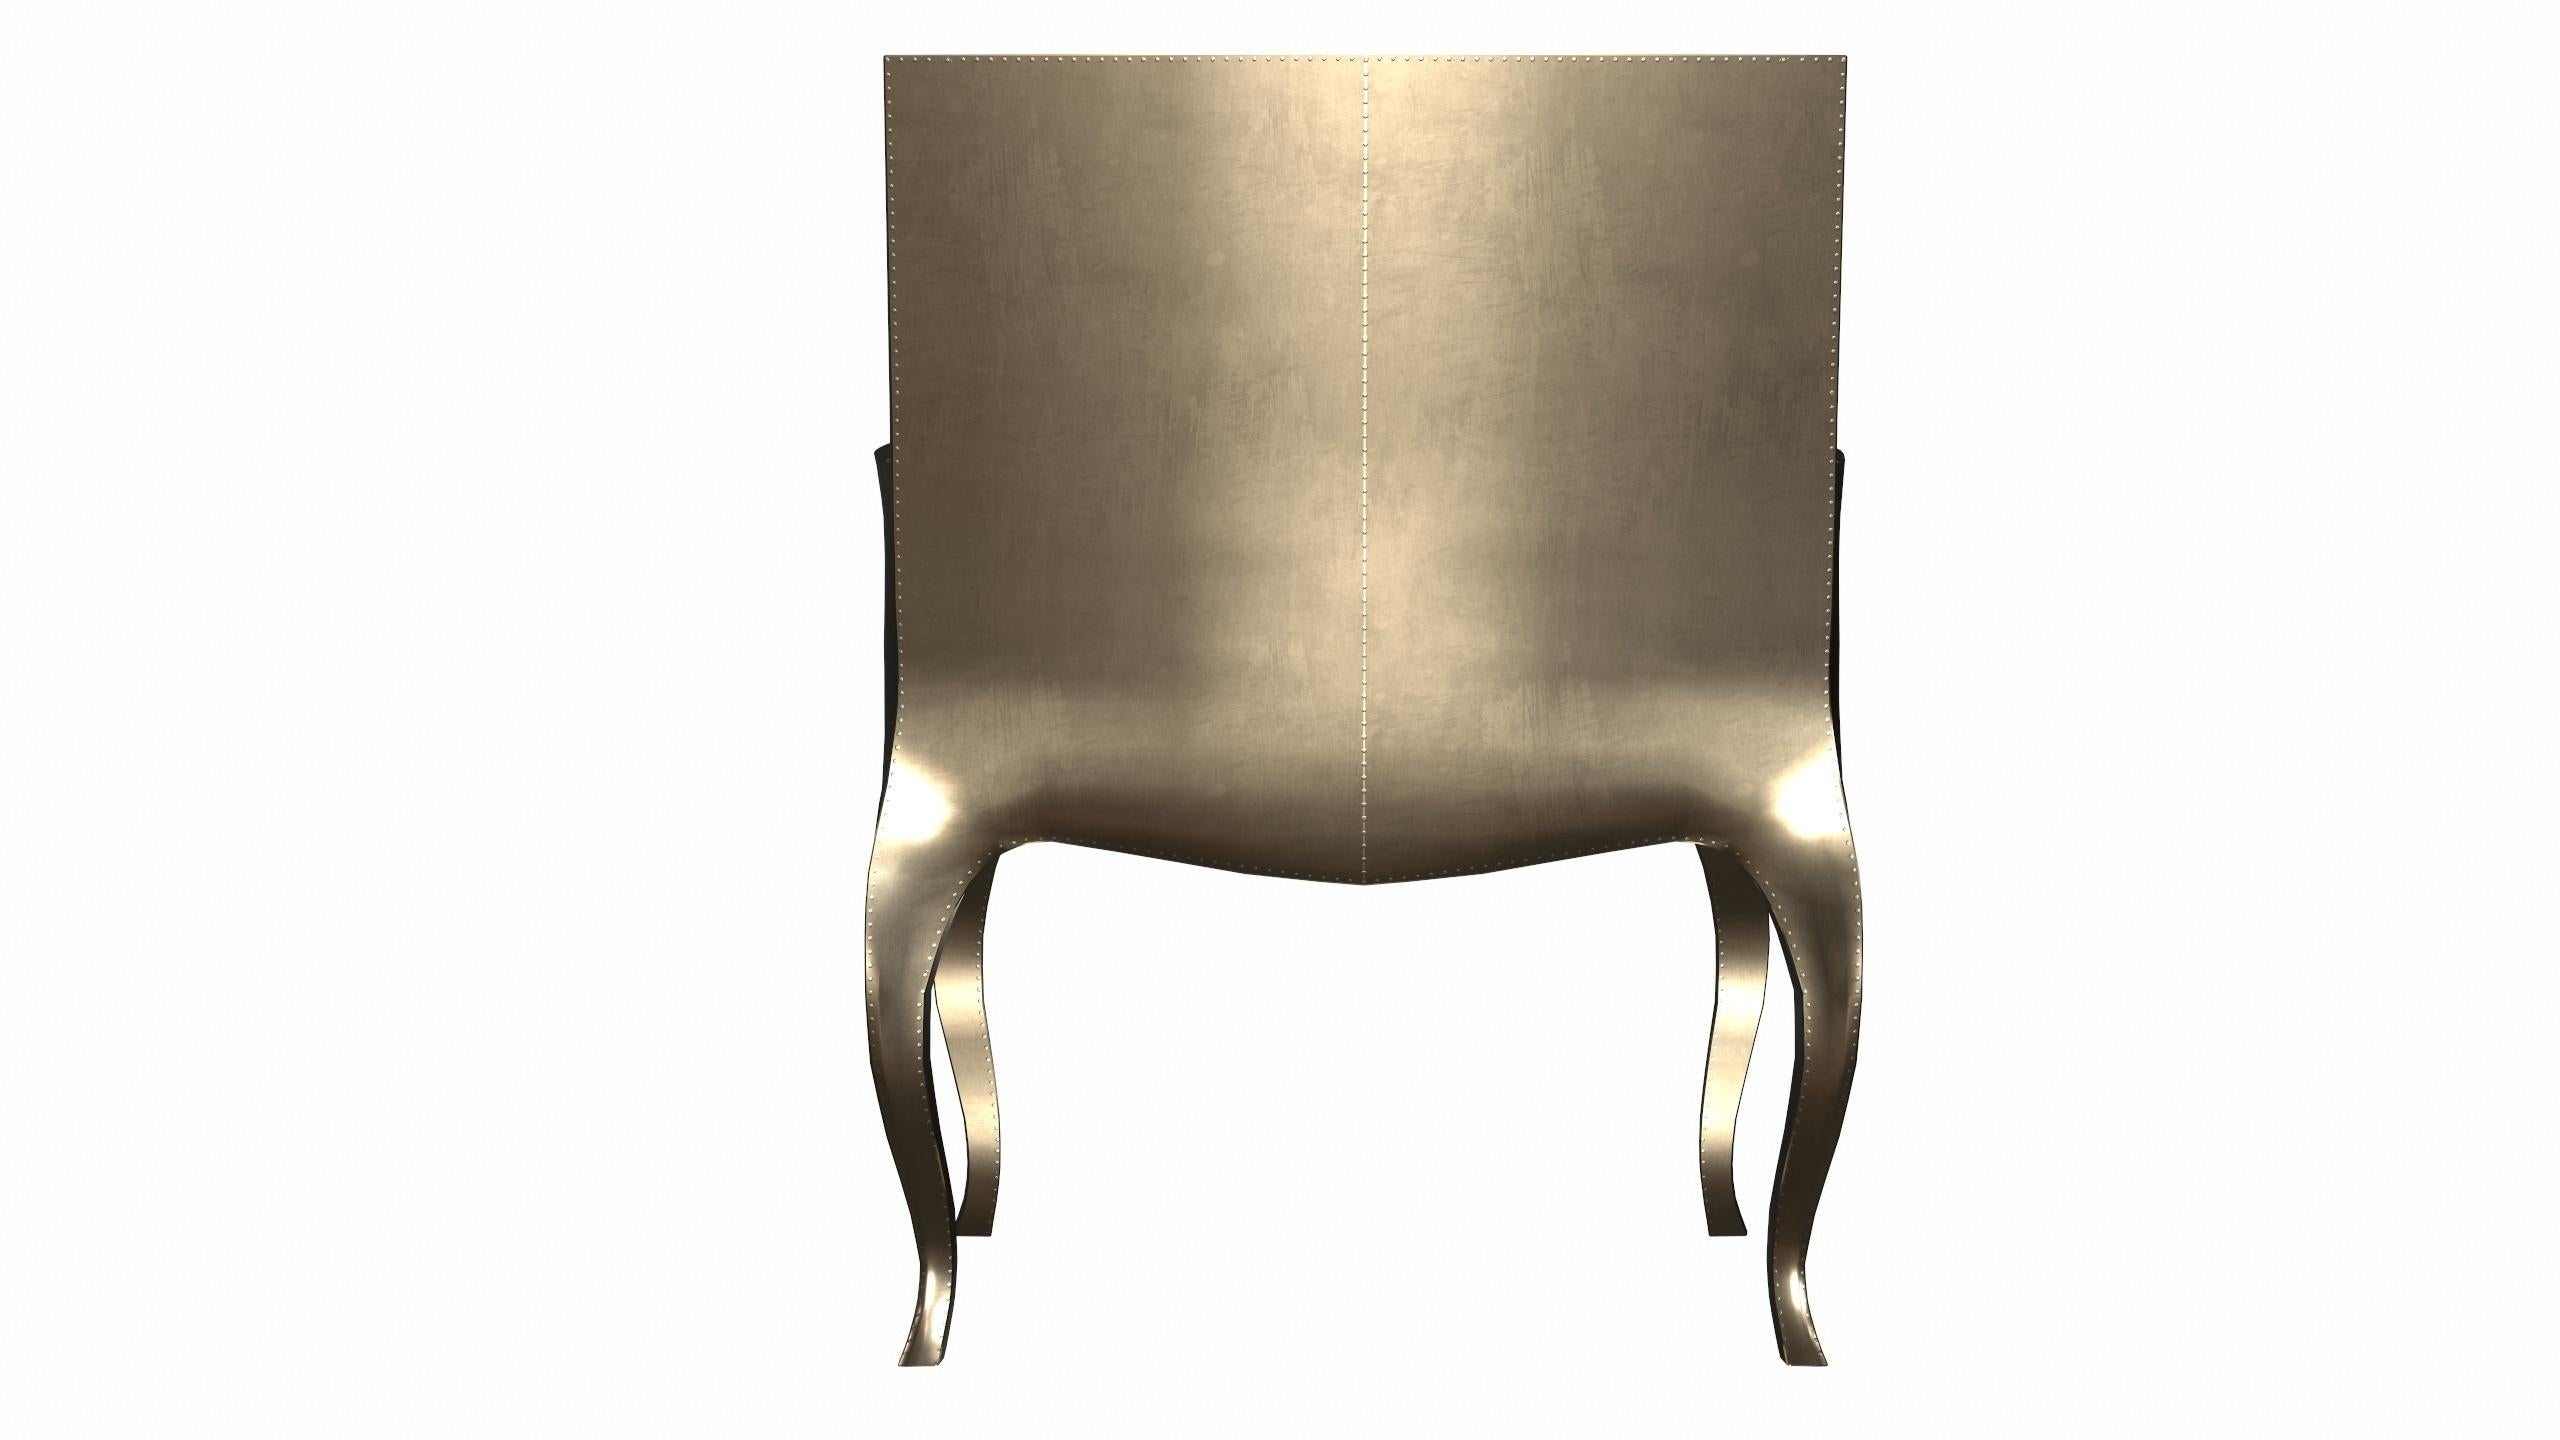 Metal Art Nouveau Chairs in Smooth Brass by Paul Mathieu for S. Odegard For Sale